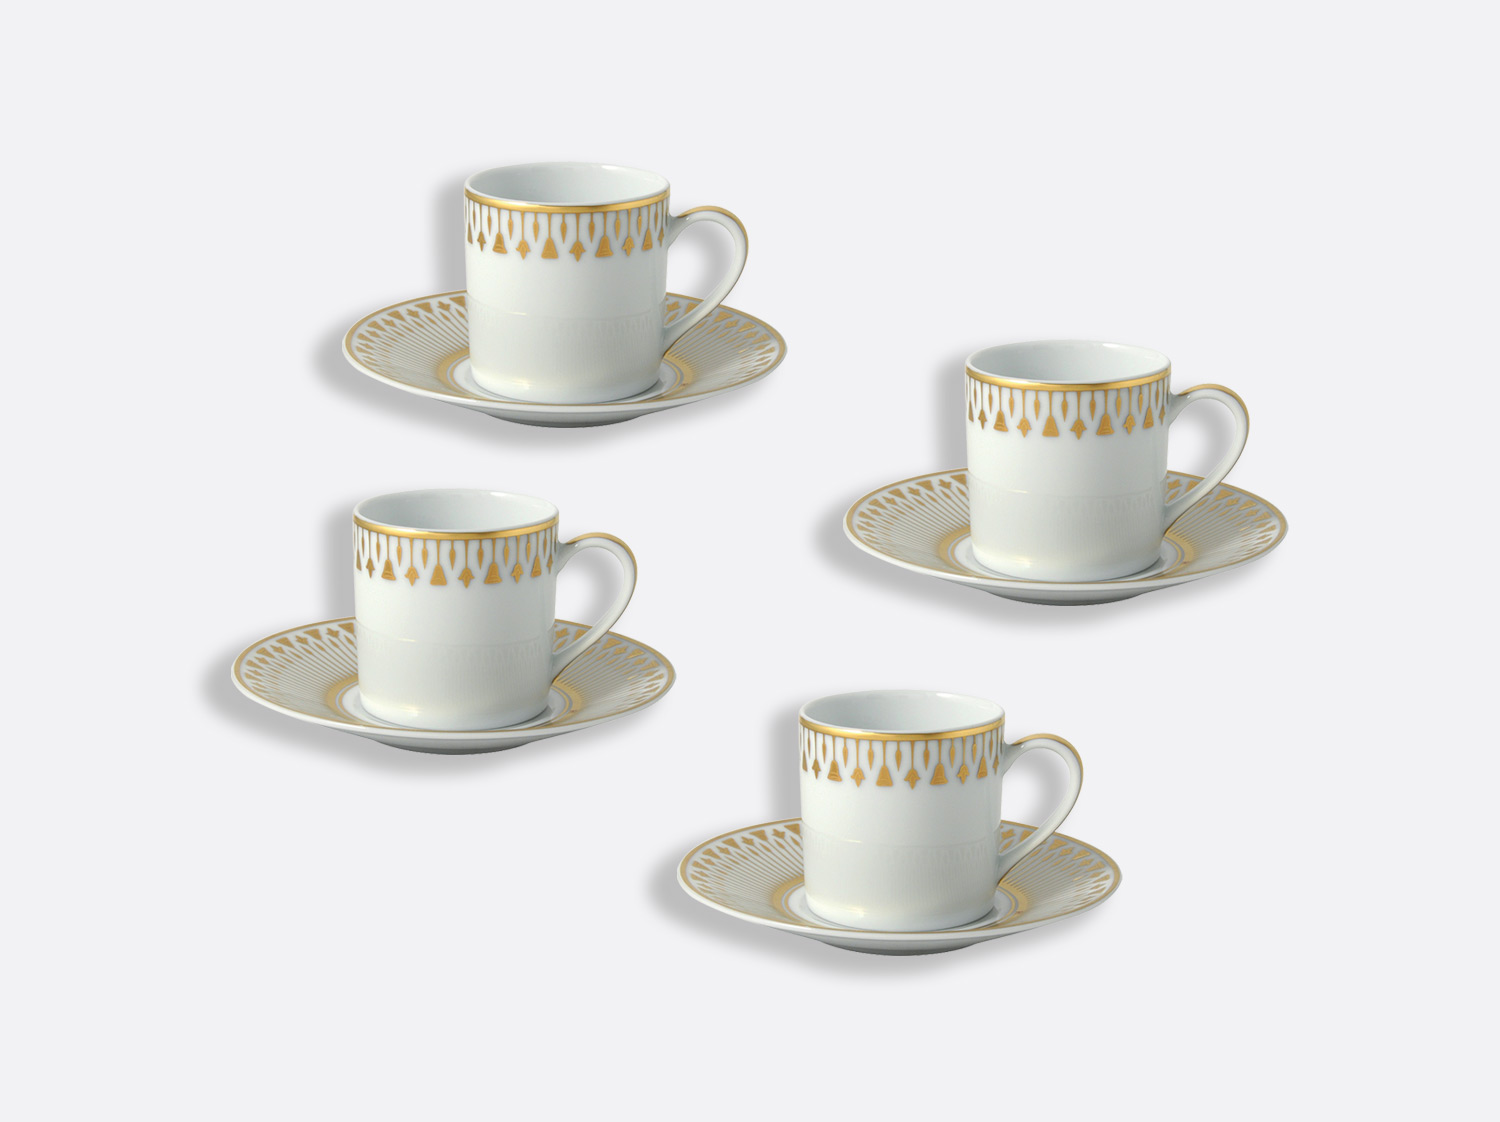 China Espresso cup and saucer gift box - 3 oz - Set of 4 of the collection Soleil levant | Bernardaud